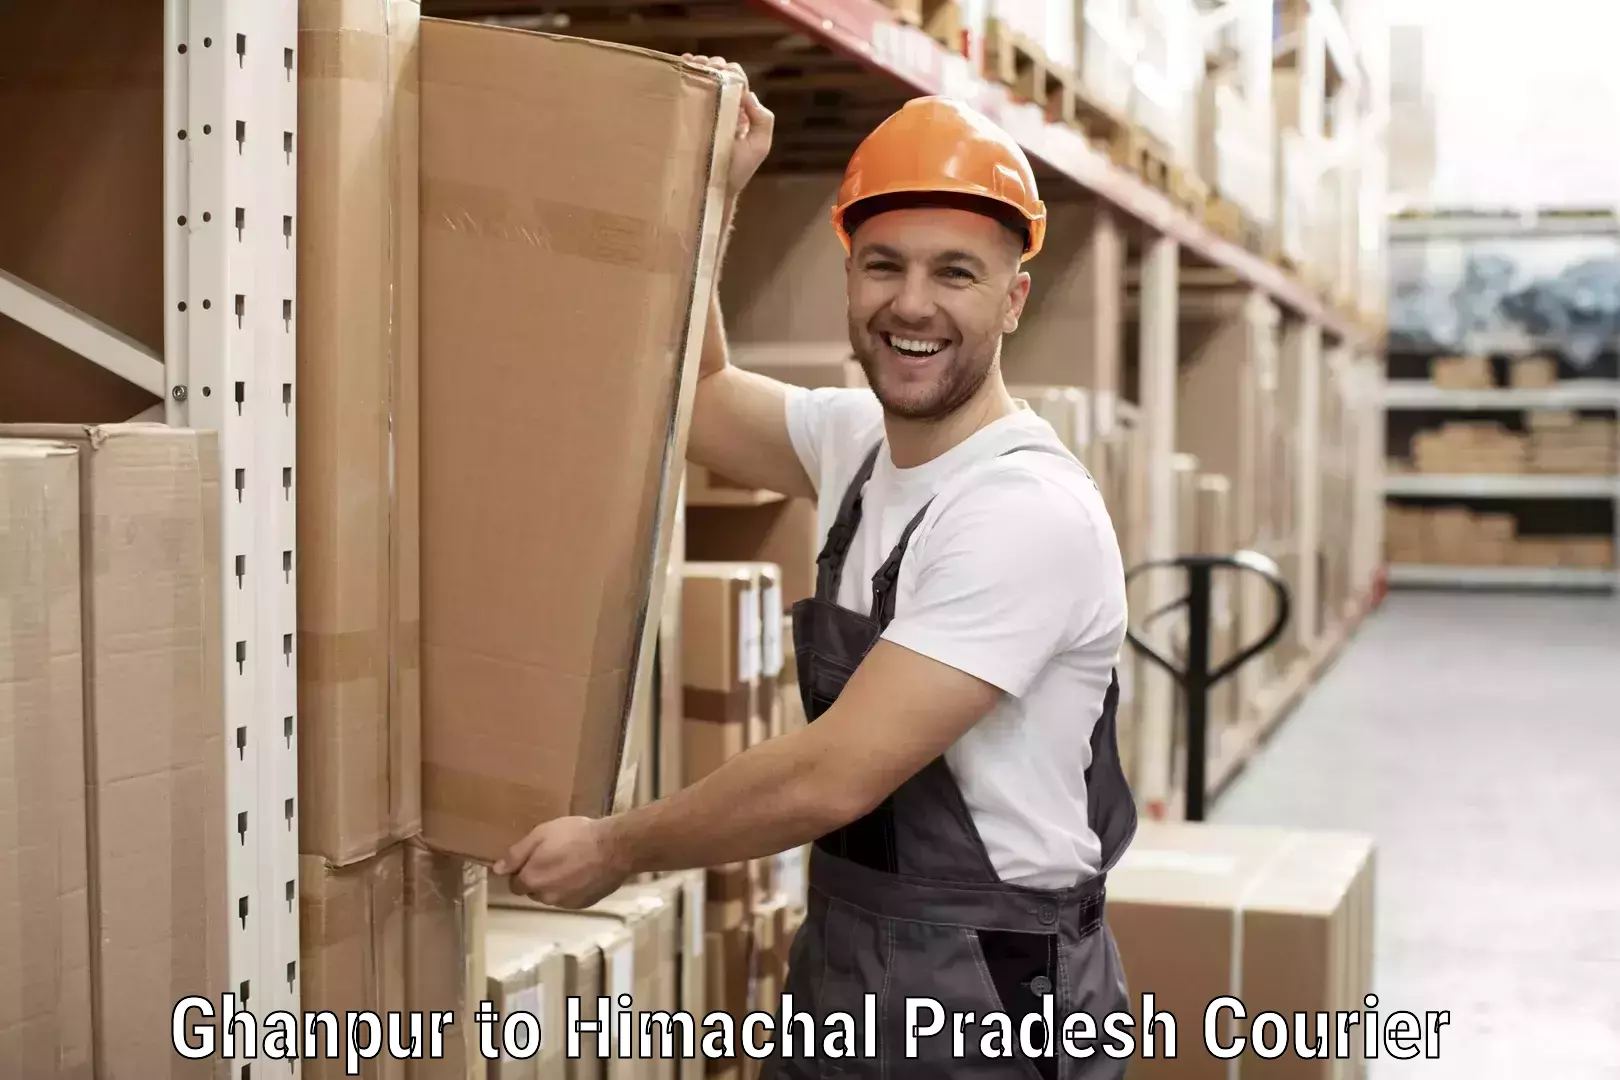 On-call courier service Ghanpur to Dulchehra